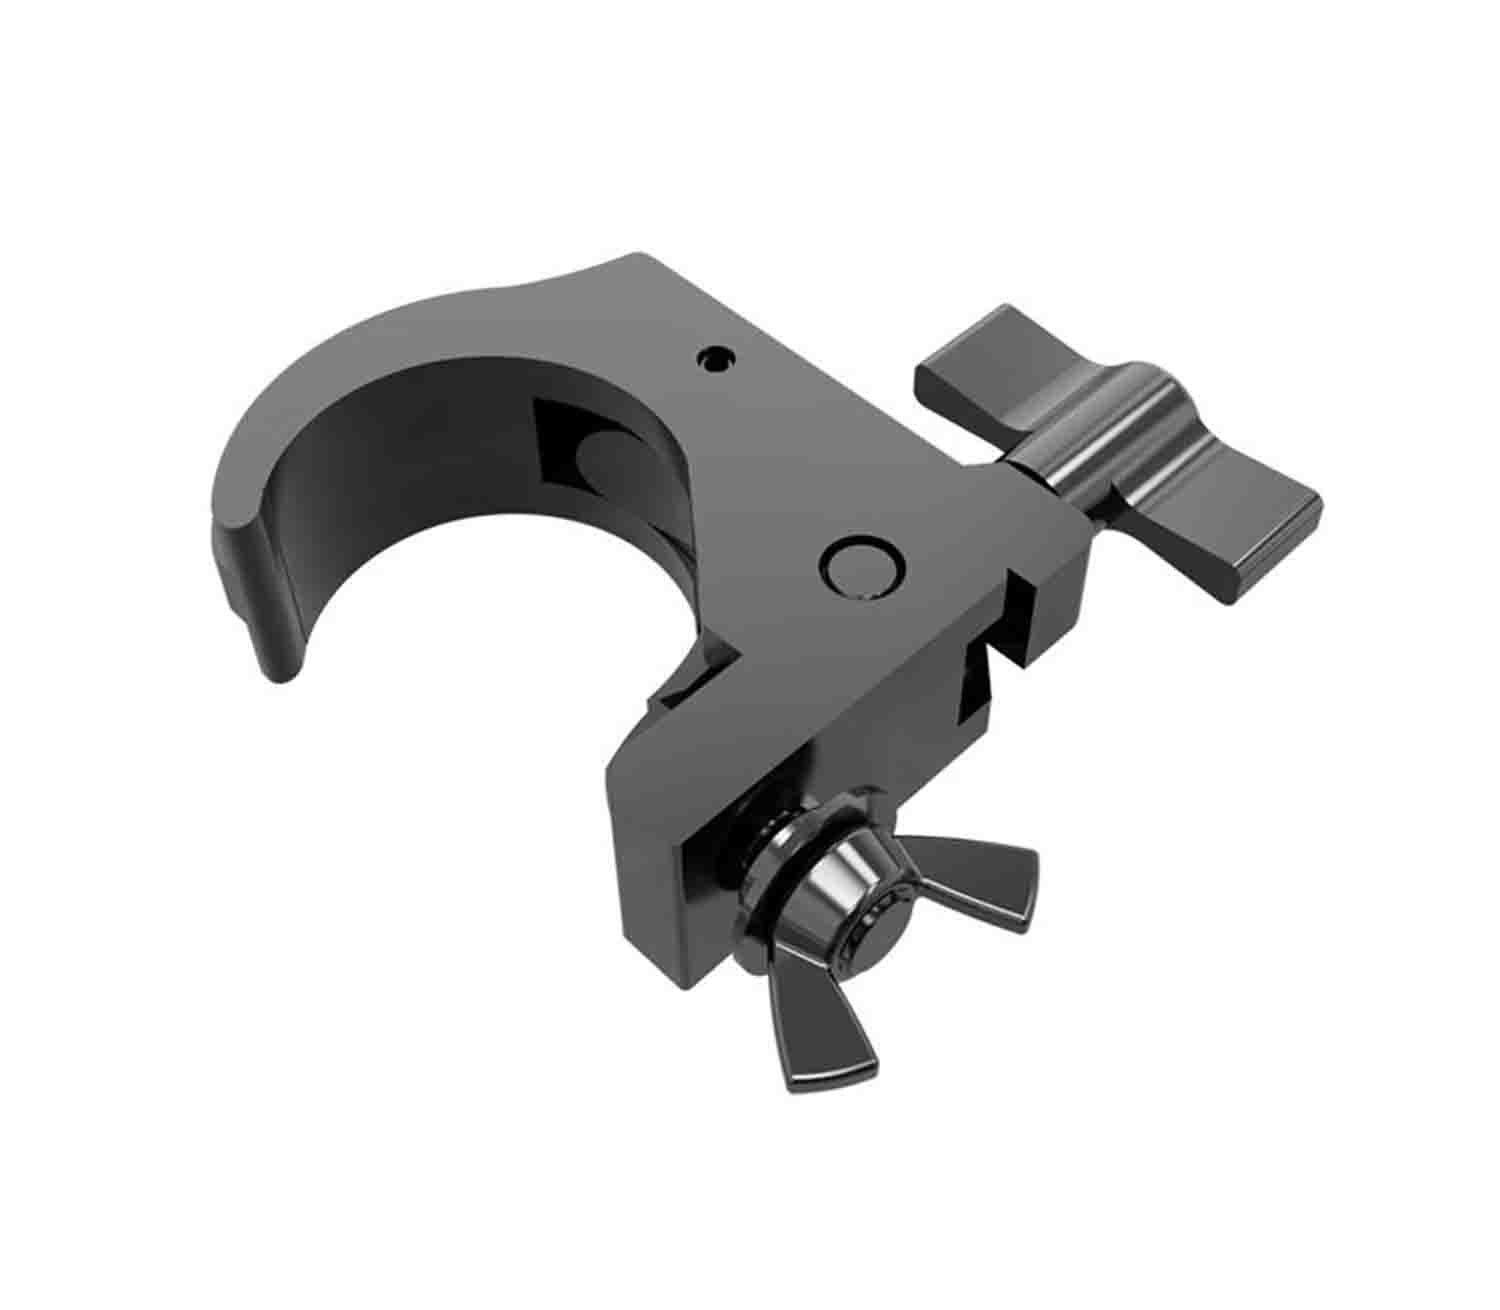 Global Truss SNAP CLAMP BLK, Medium Duty Low Profile Hook Style Clamp with T handle for 2" OD Tube - Black - Hollywood DJ